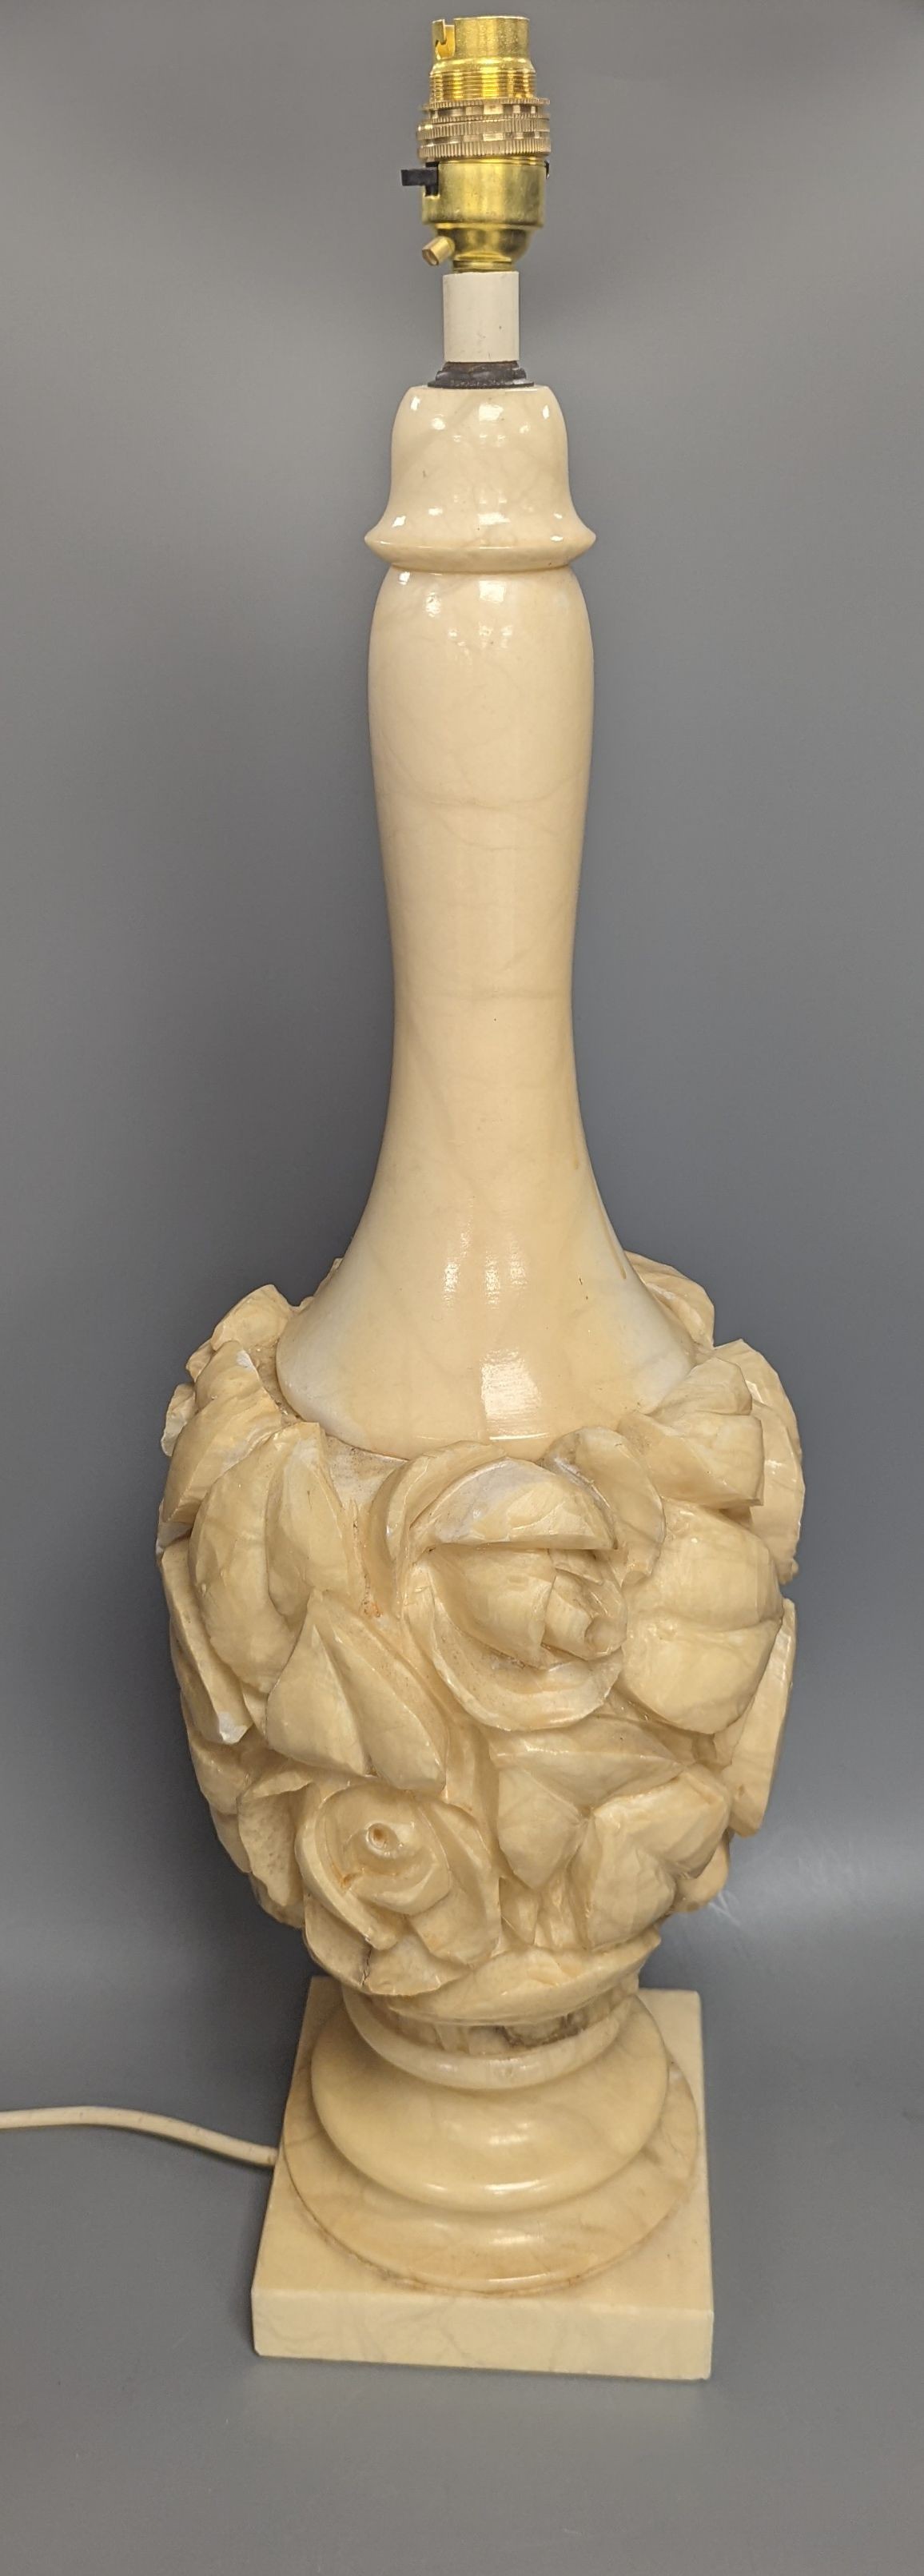 A carved alabaster lamp, height 60cm excl. light fitting, and a turned alabaster plafonnier, 35.5 cm diameter